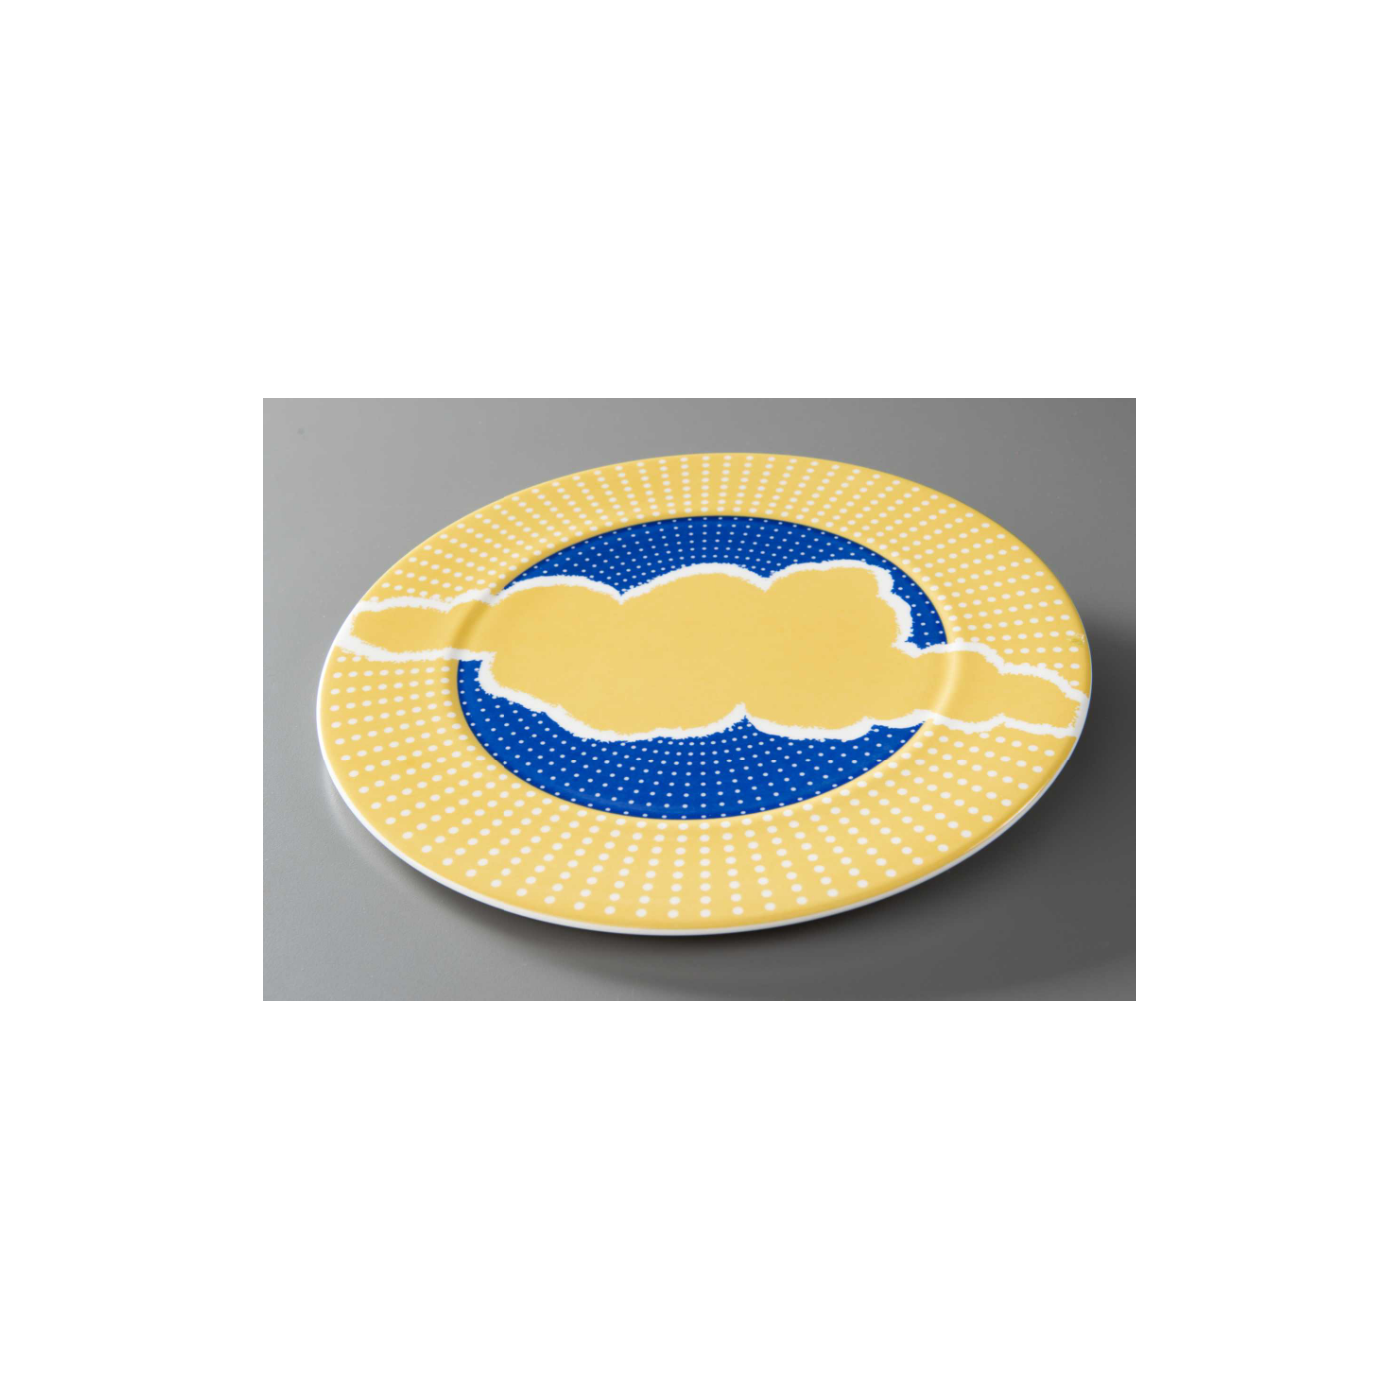 Plate charger designed for the Windows on the World restaurant. The charger is blue and yellow with a yellow cloud motif and small white dots that radiate from the center.